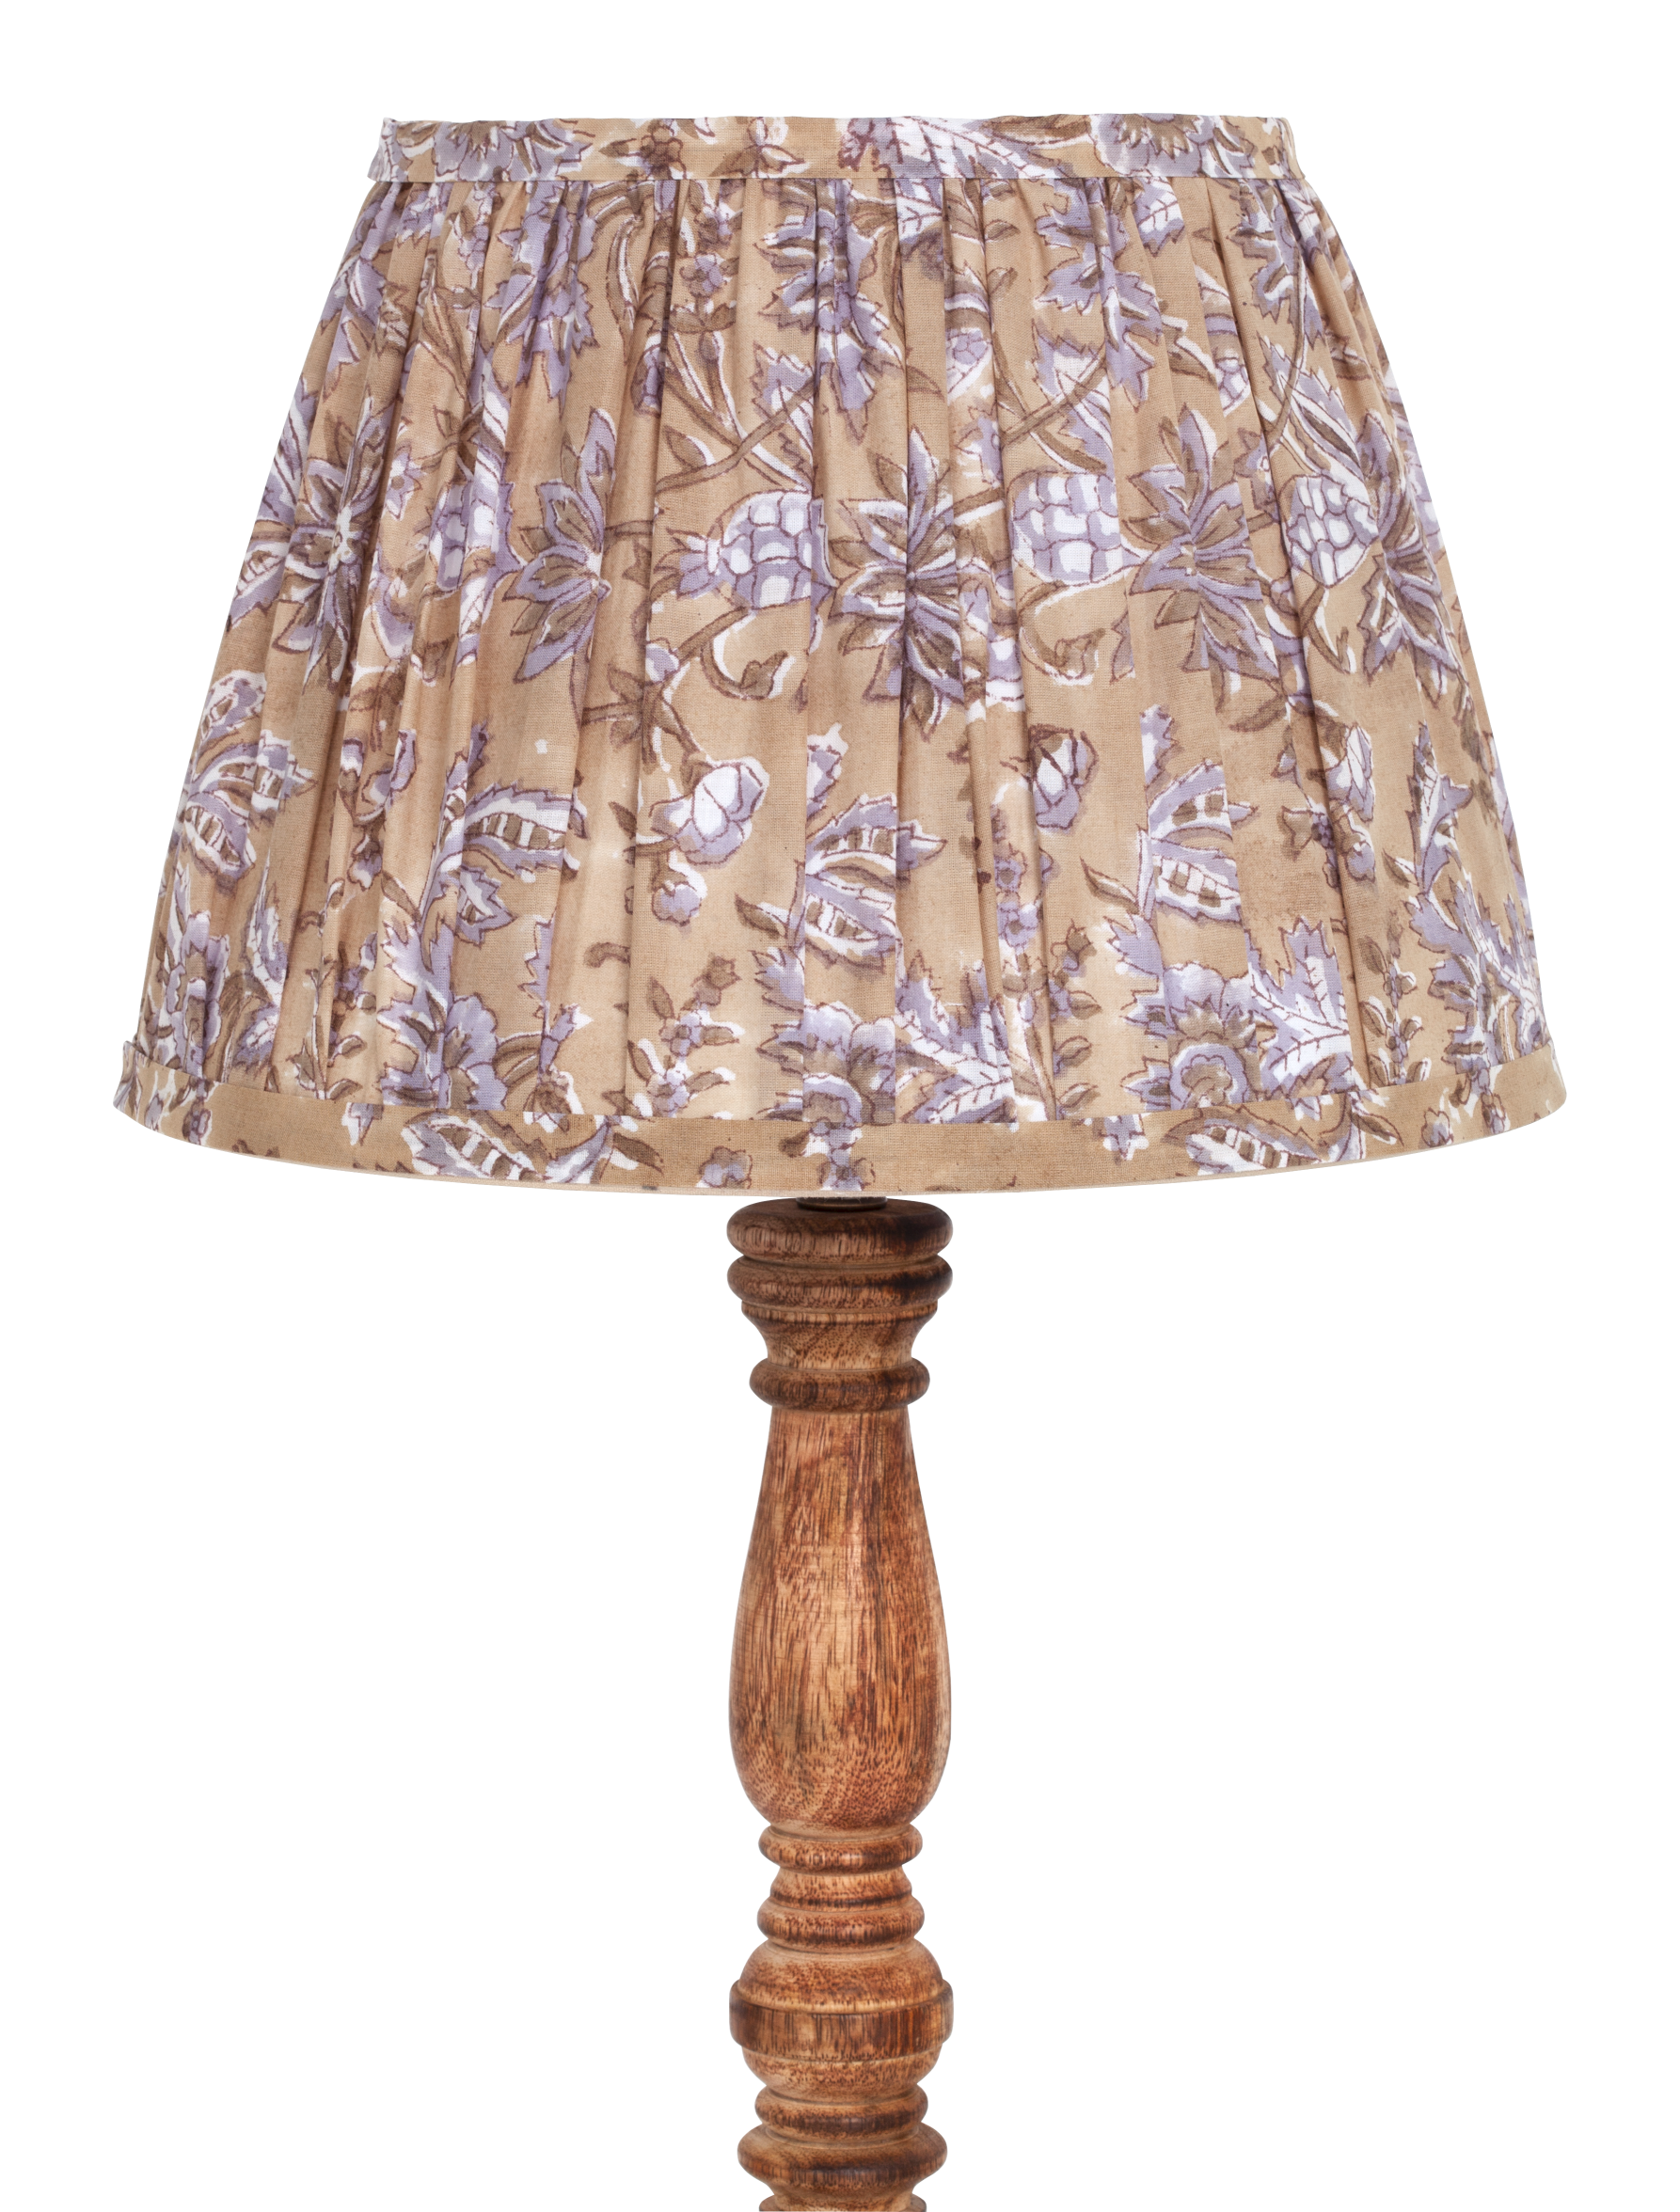 Lampshade with Indian Summer print in Beige/Lavender - Medium